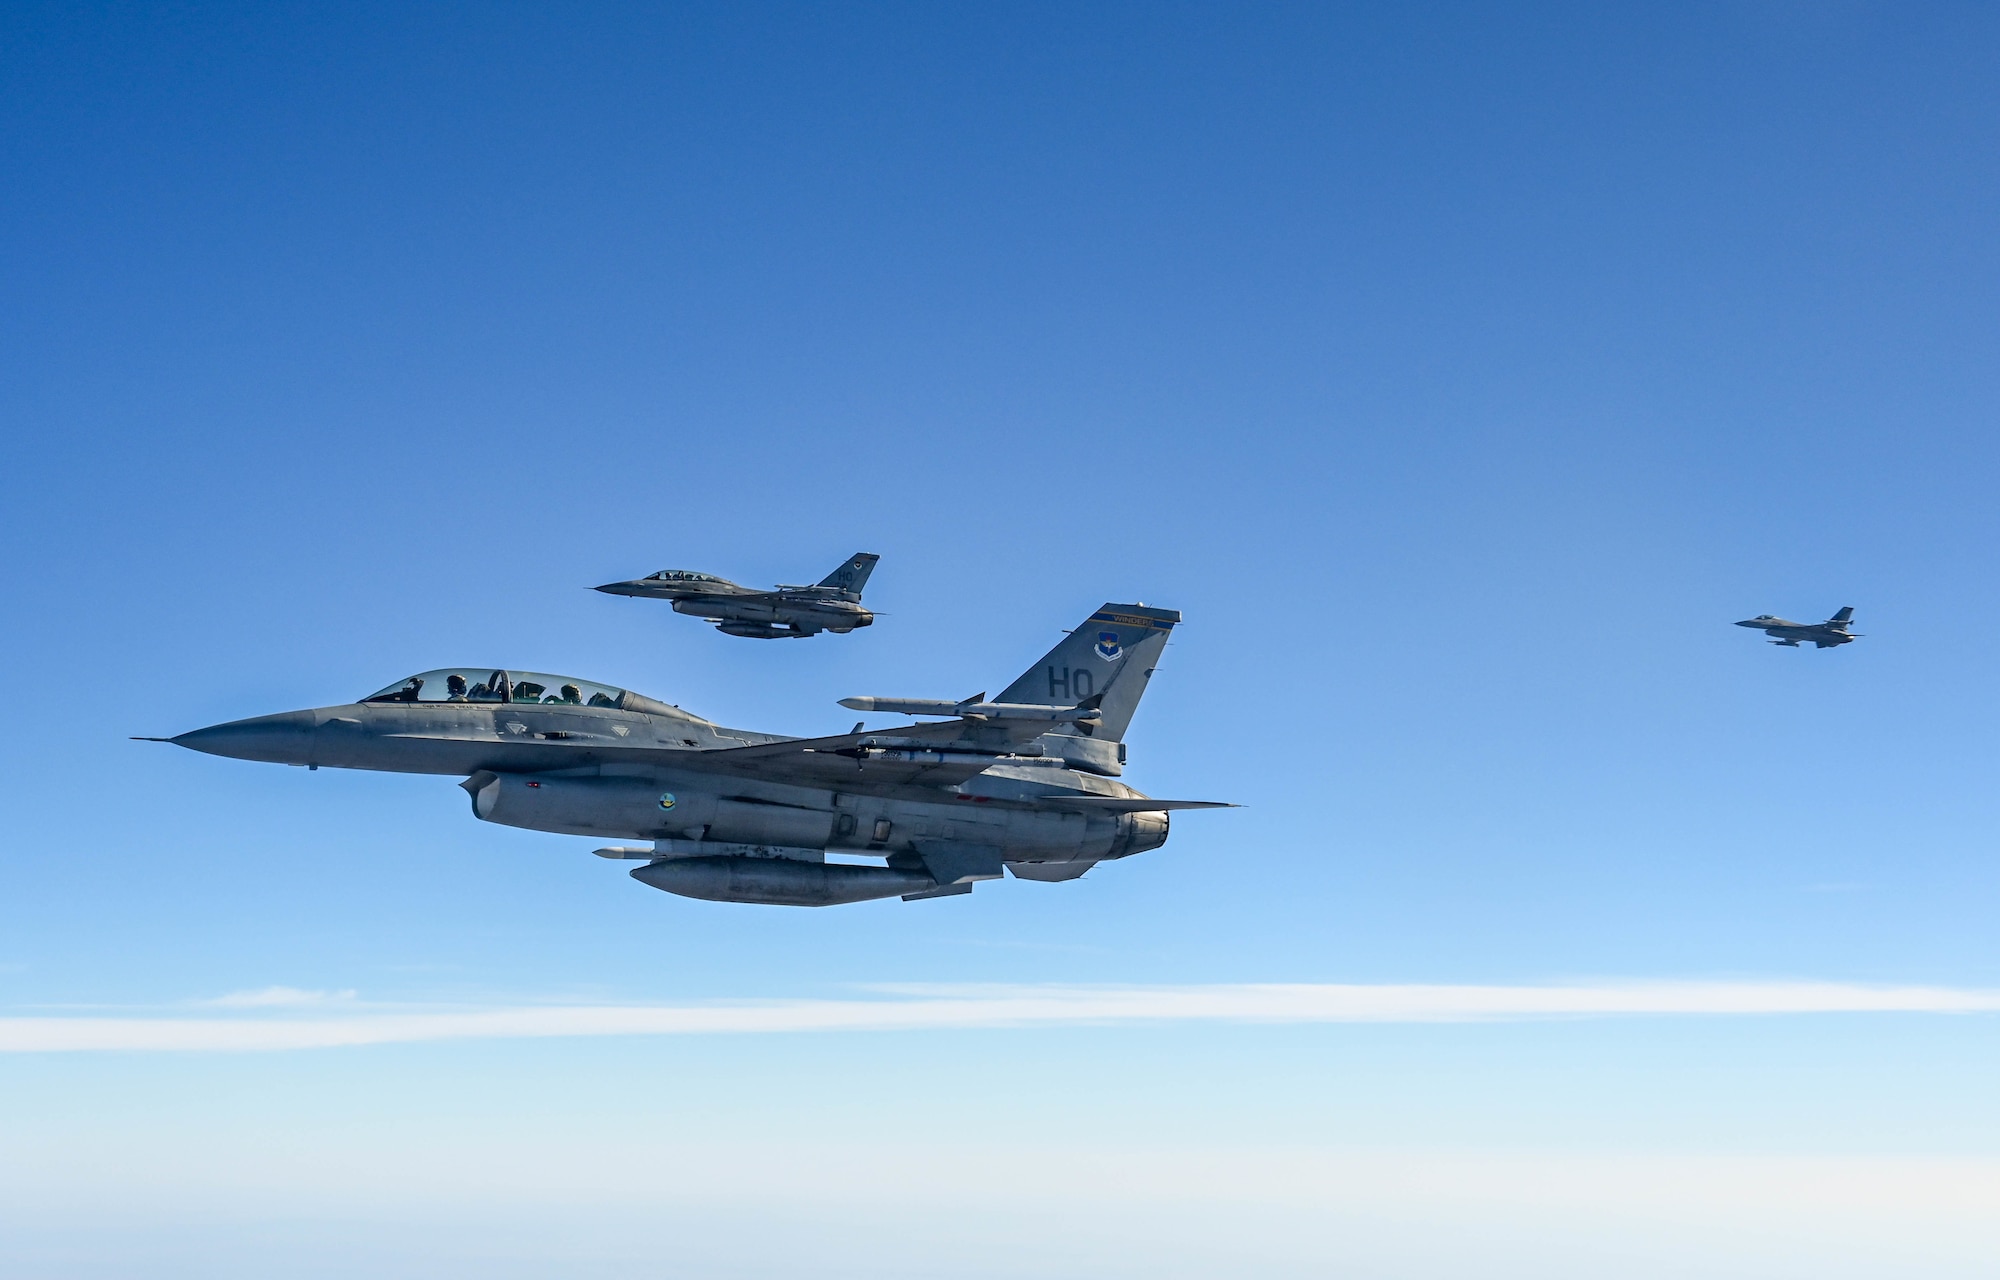 F-16 Fighting Falcons from the 311th Fighter Squadron, fly above New Mexico during an aerial refueling training mission Nov. 20, 2020. (U.S. Air Force photo by Senior Airman Mary Begy)